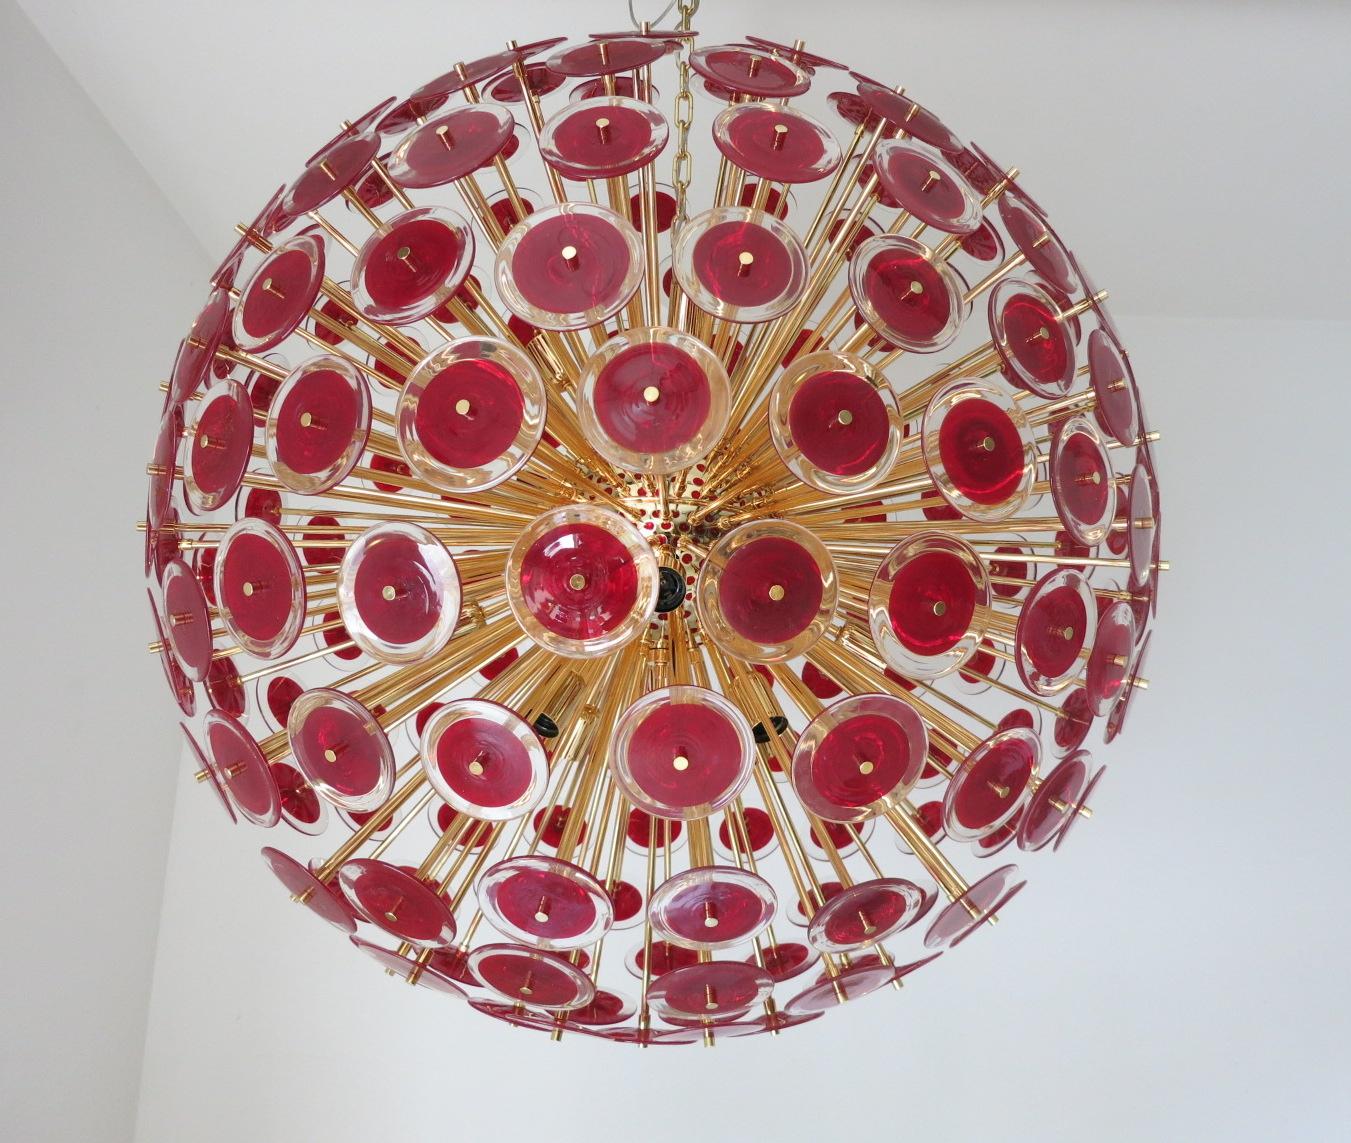 Italian round sputnik chandelier with red and clear Murano glass discs mounted on 24-karat gold plated metal frame by Fabio Ltd / Made in Italy
16 lights / E26 or E27 type / max 60W each
Measures: Diameter 43.5 inches, height 43.5 inches plus chain